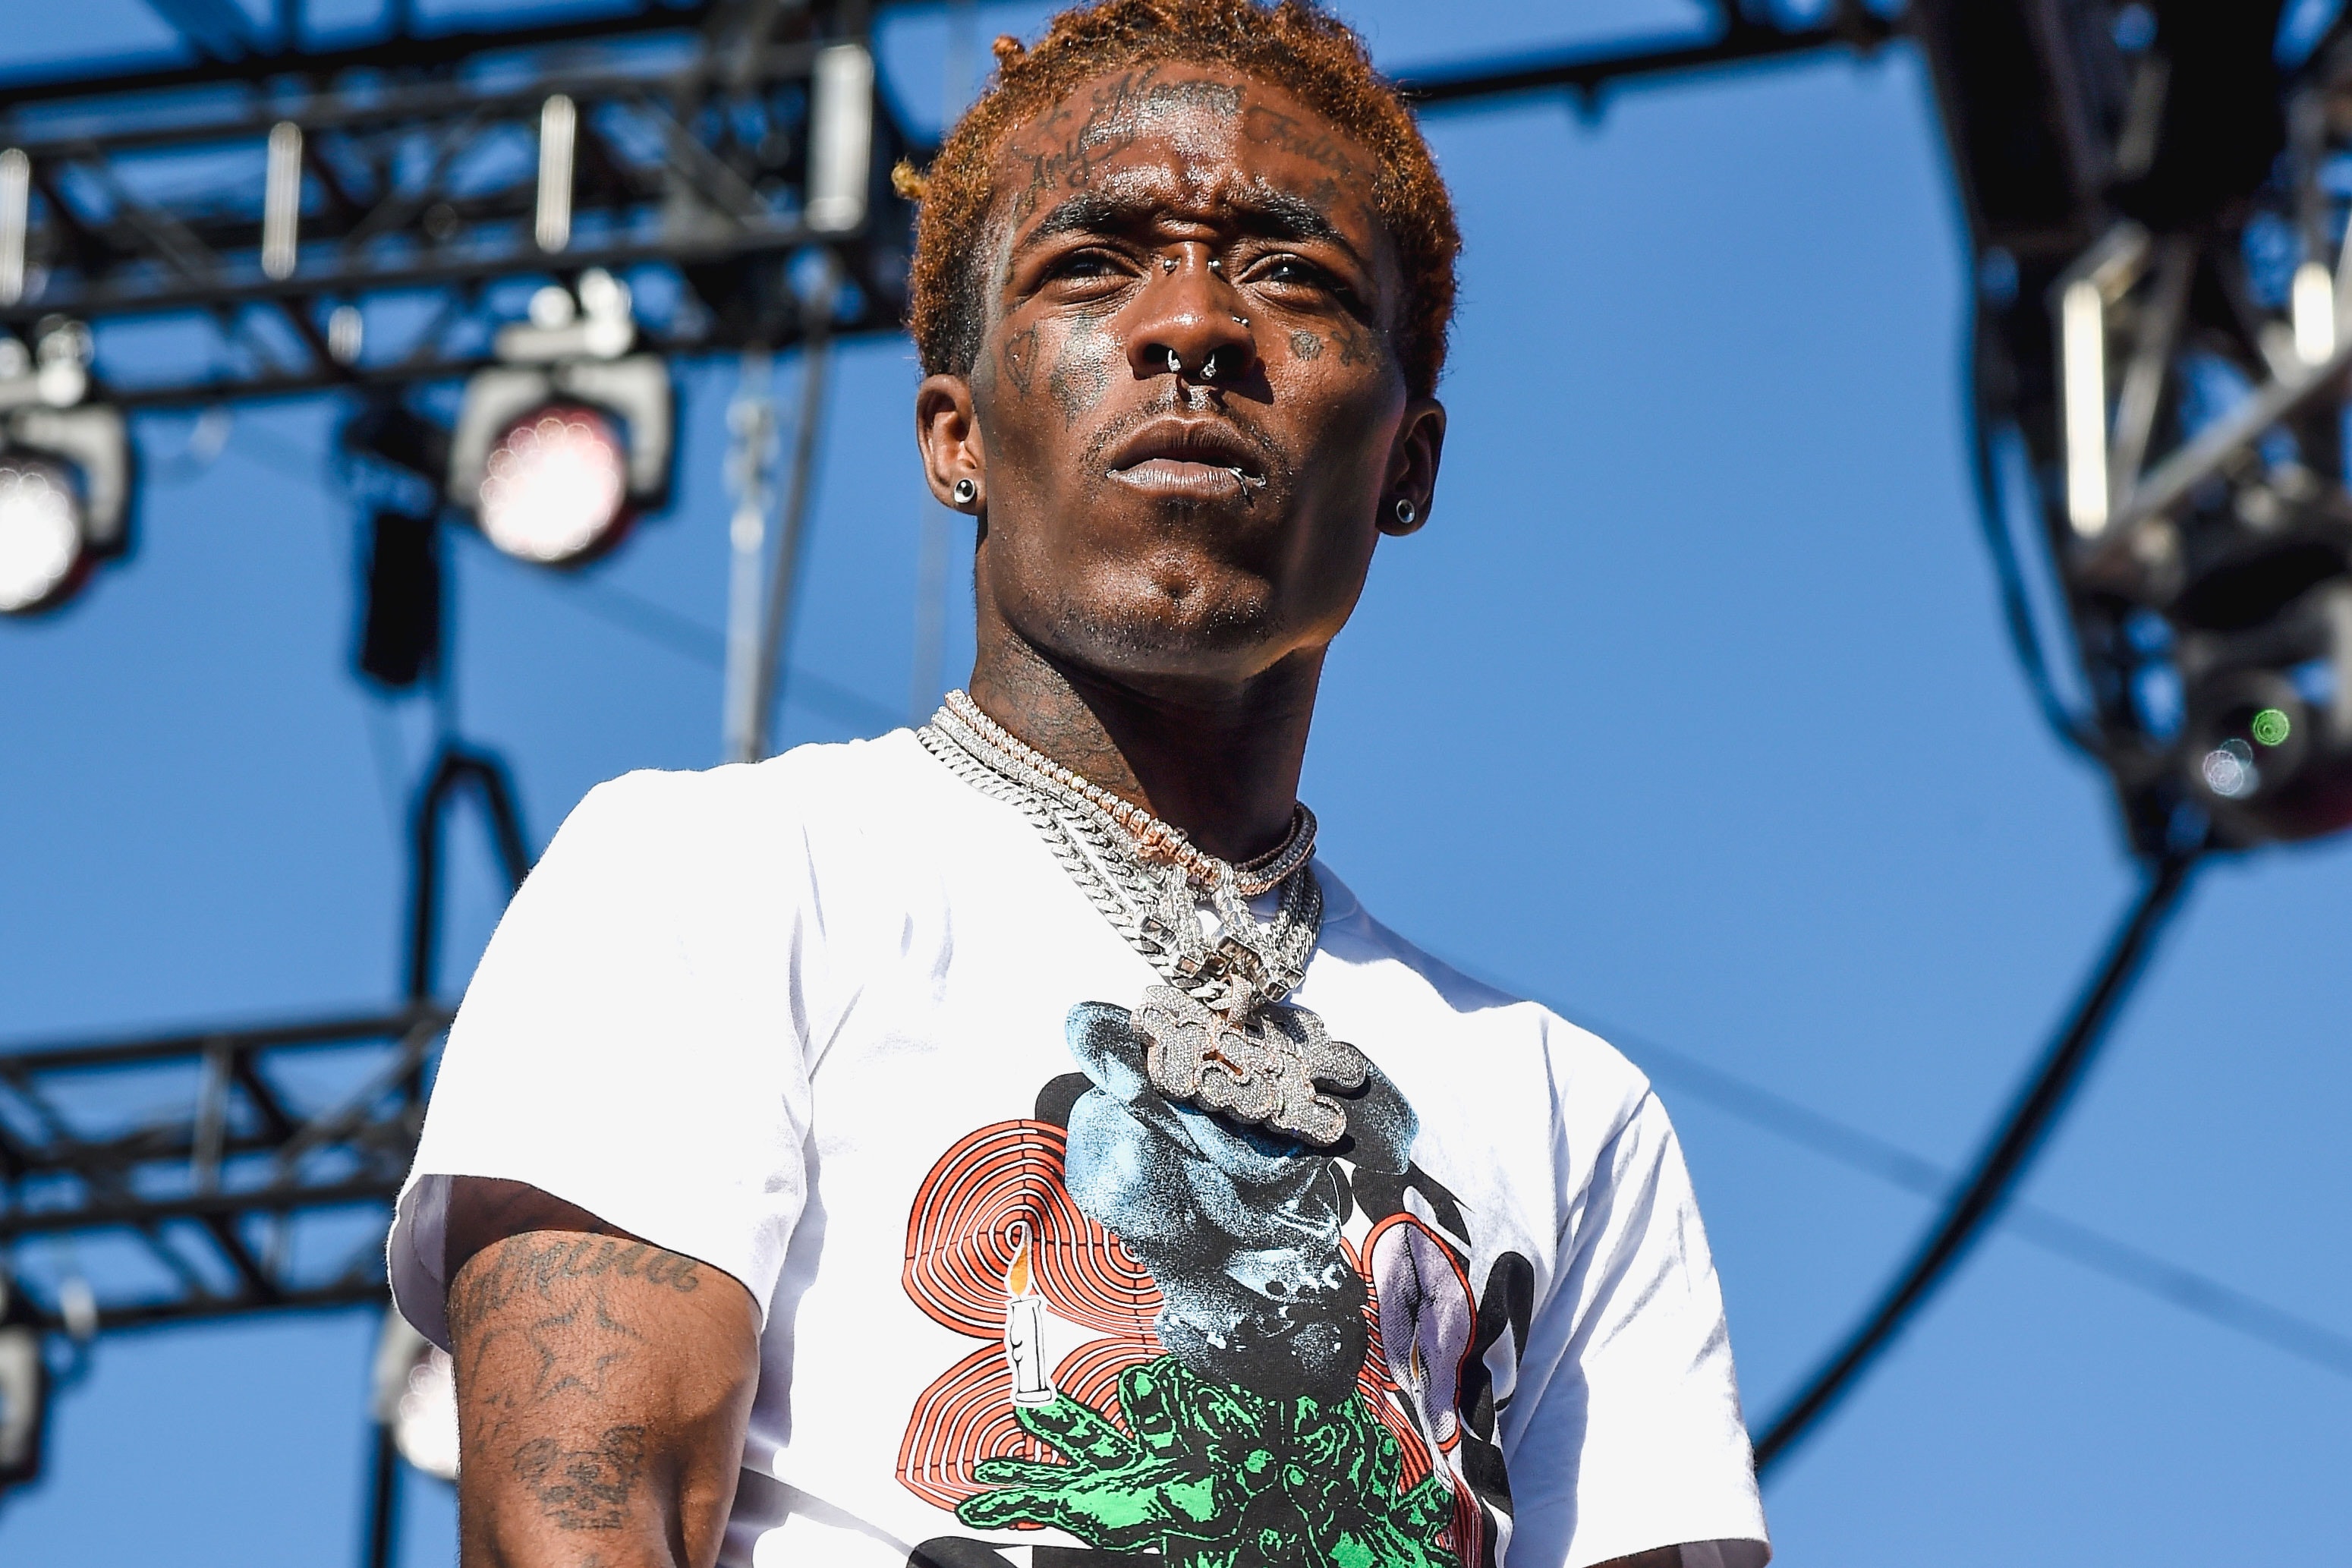 Lil Uzi Vert Announces He's "Done With Music" quit Eternal Atake